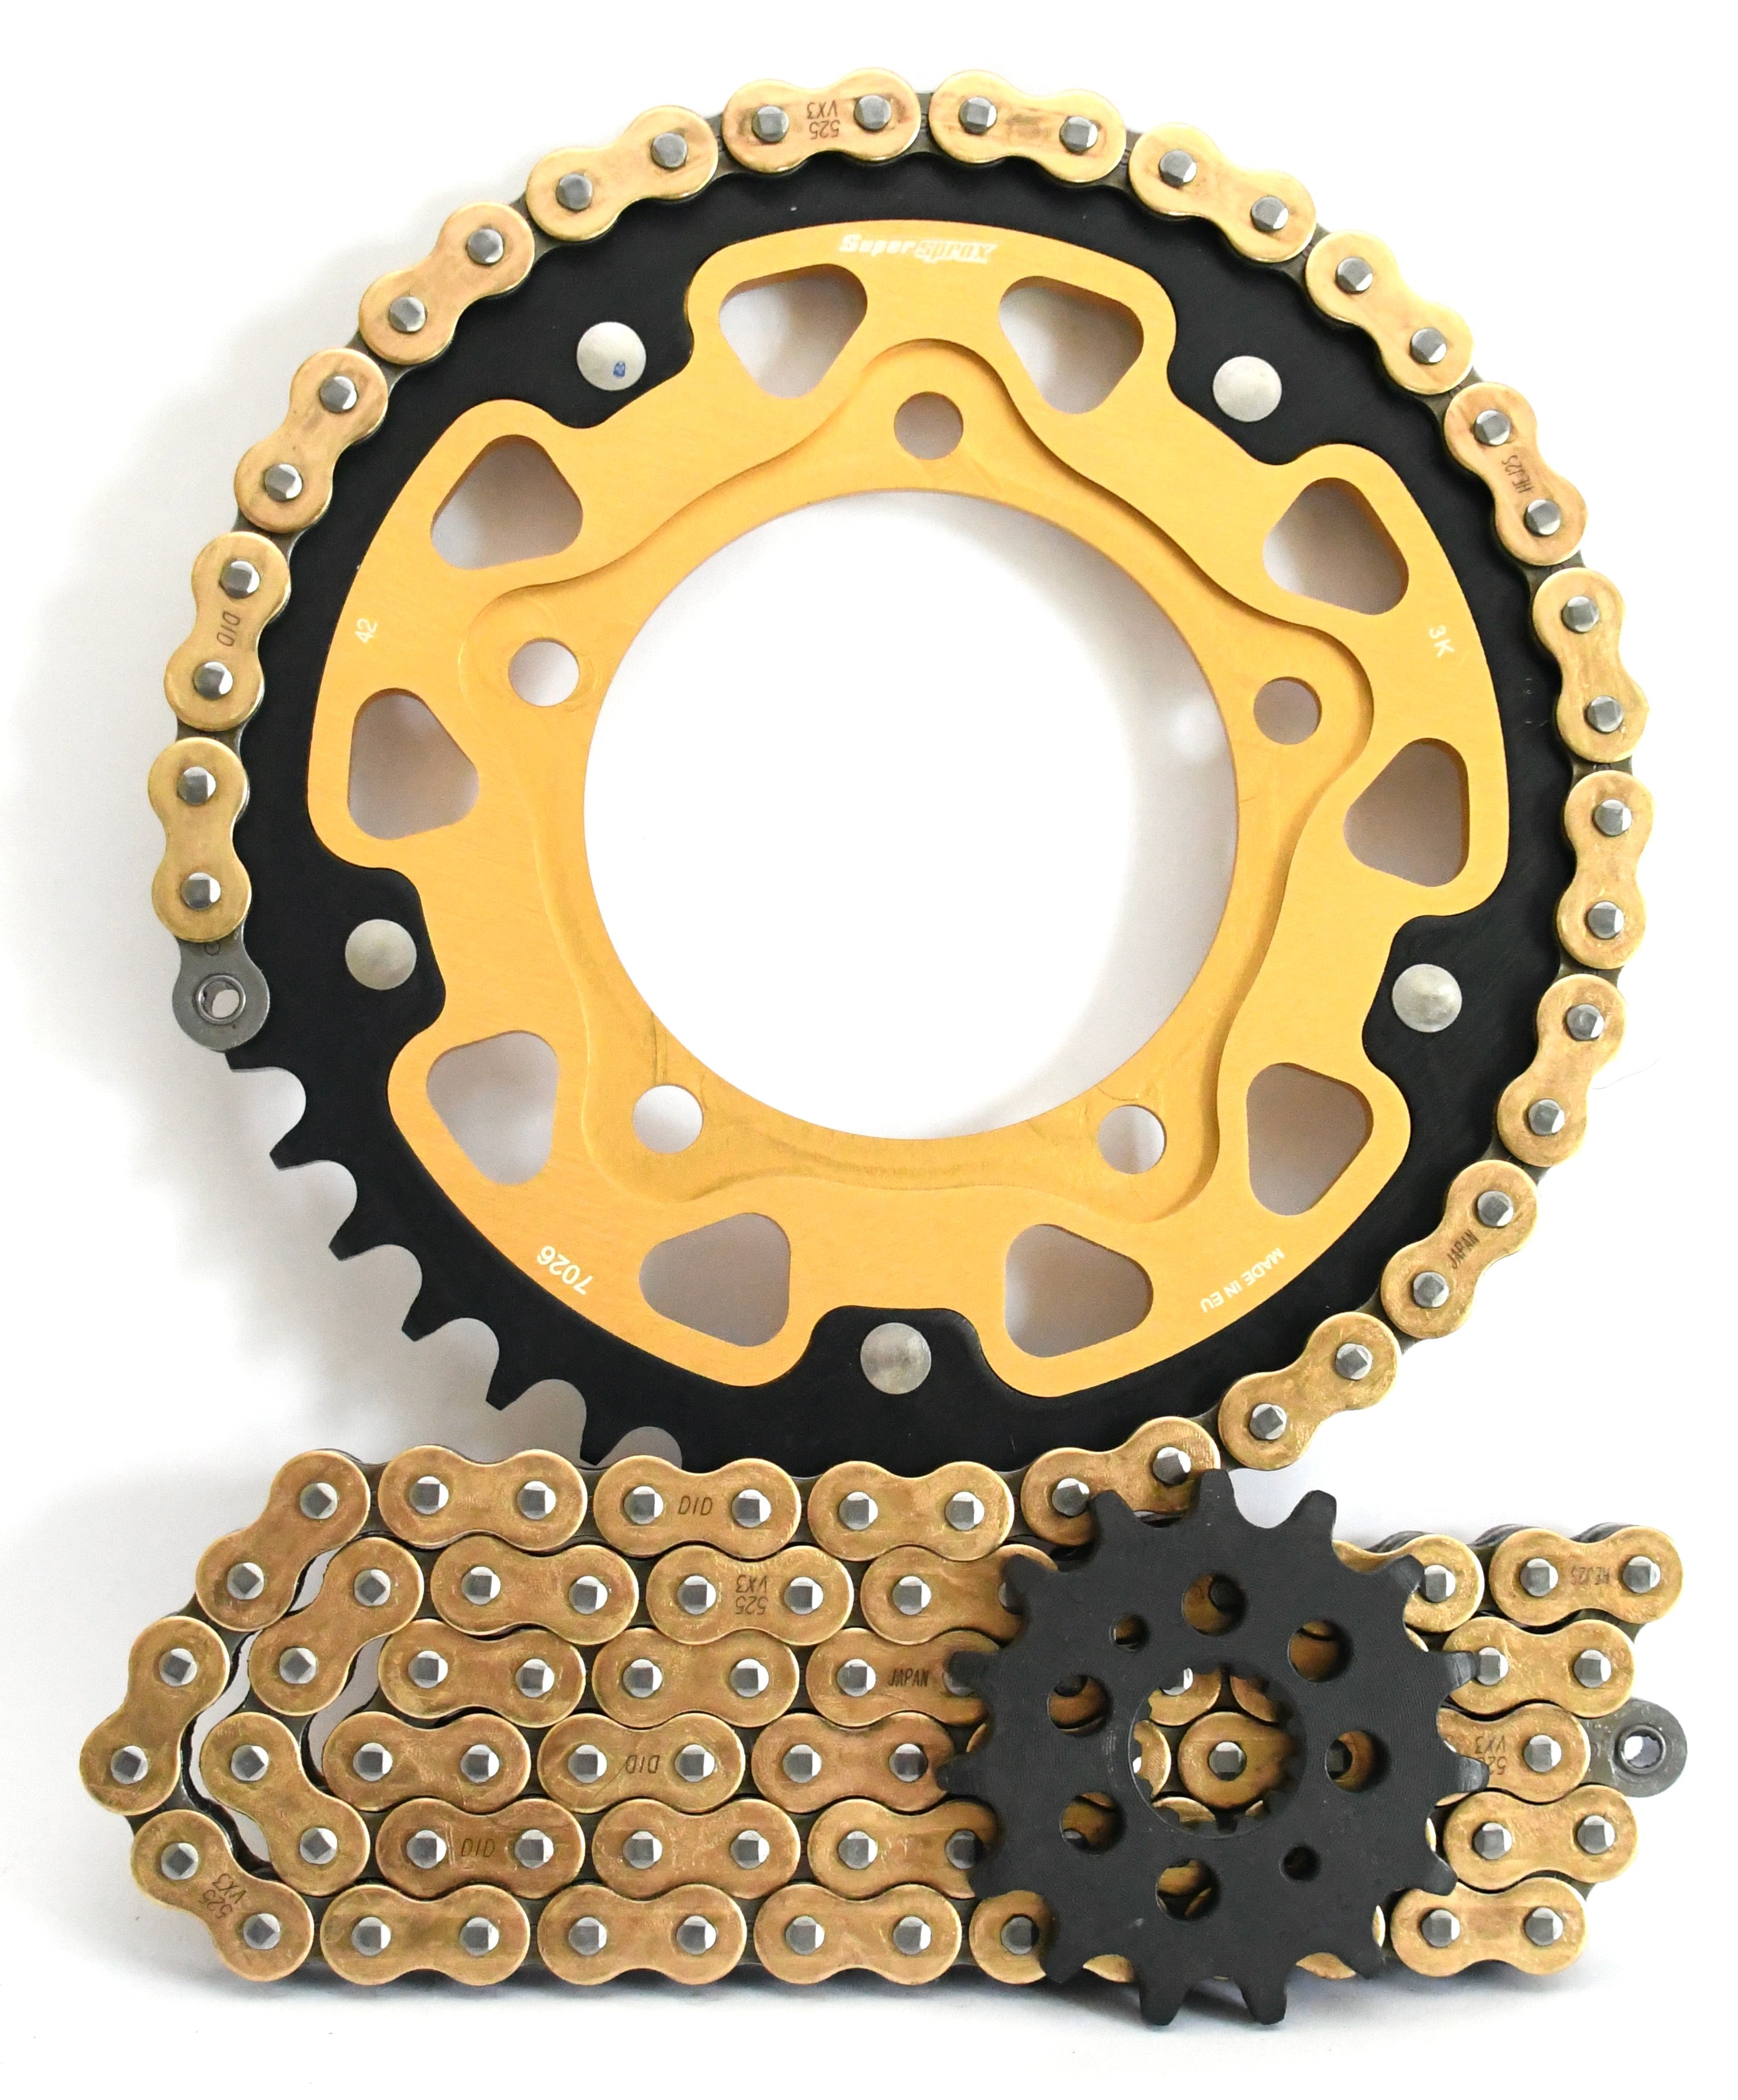 Supersprox Chain & Sprocket Kit for Aprilia Tuono 1100 V4 2015> - Standard Gearing